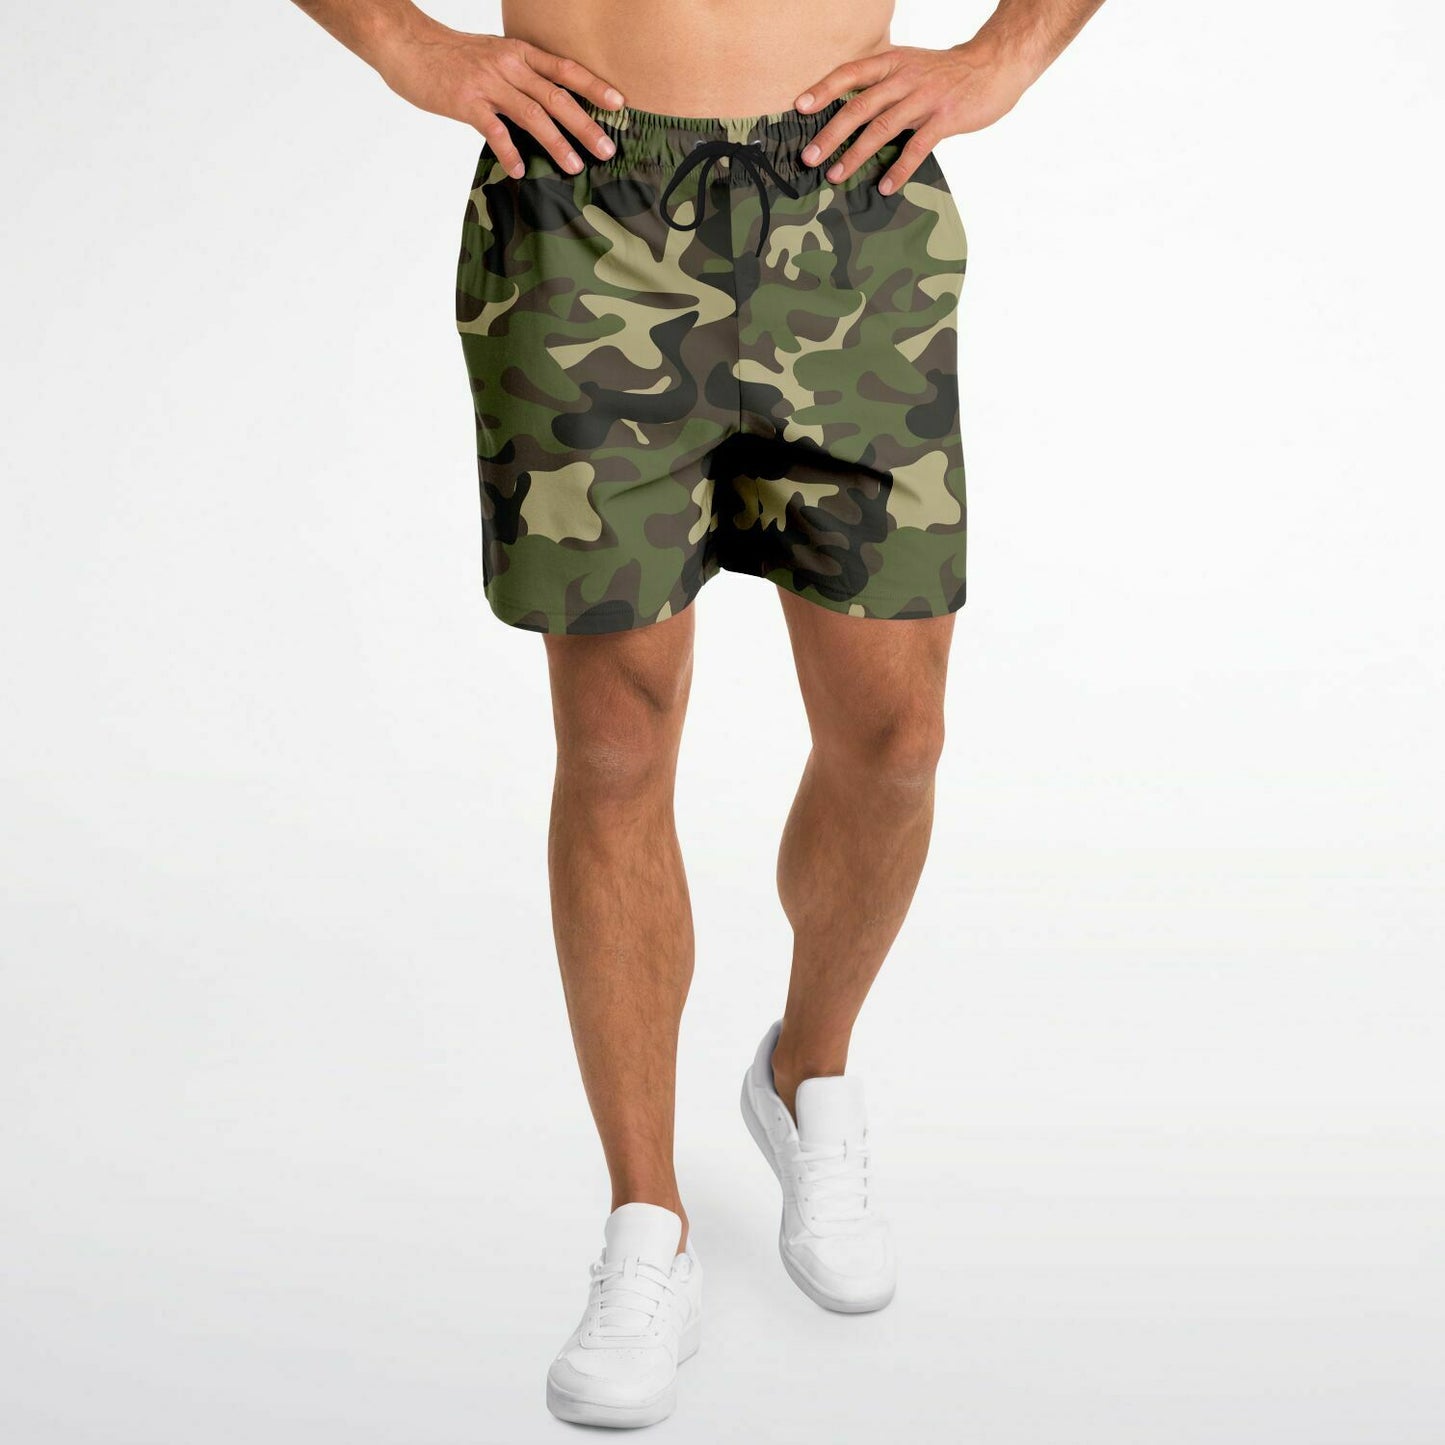 Camo Men Shorts, Camouflage Green Army Beach Mid Length 7" Inch Inseam Casual with Pockets Drawstring Casual Designer Summer